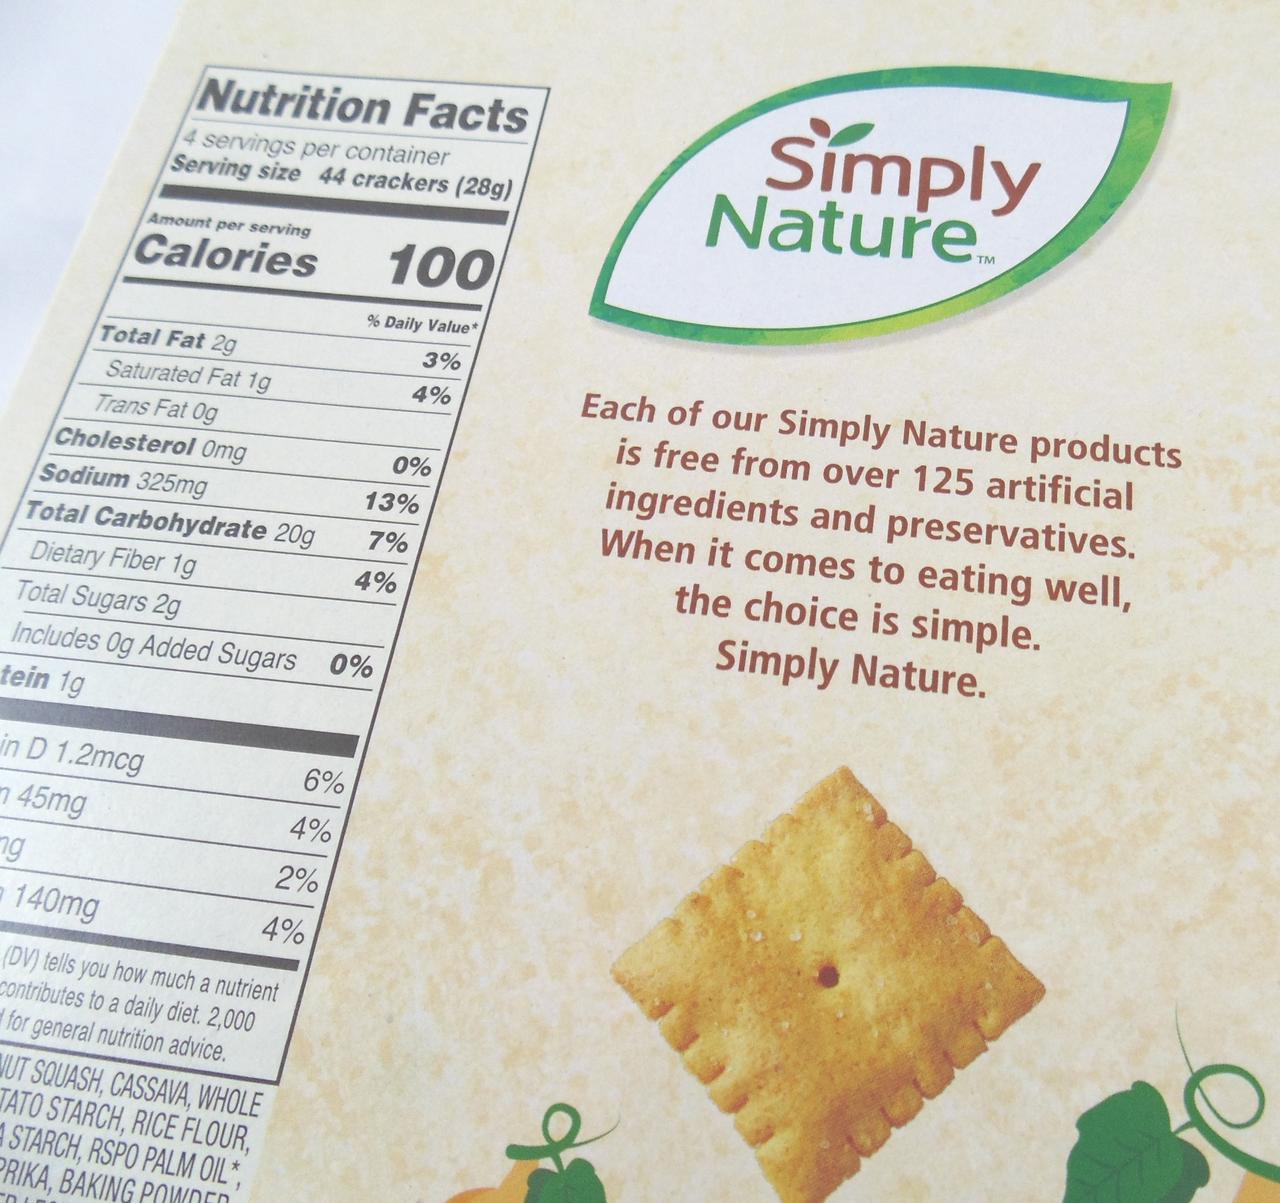 Box, Packaging, Ingredients, Nutrition Facts, Cracker, Natural foods